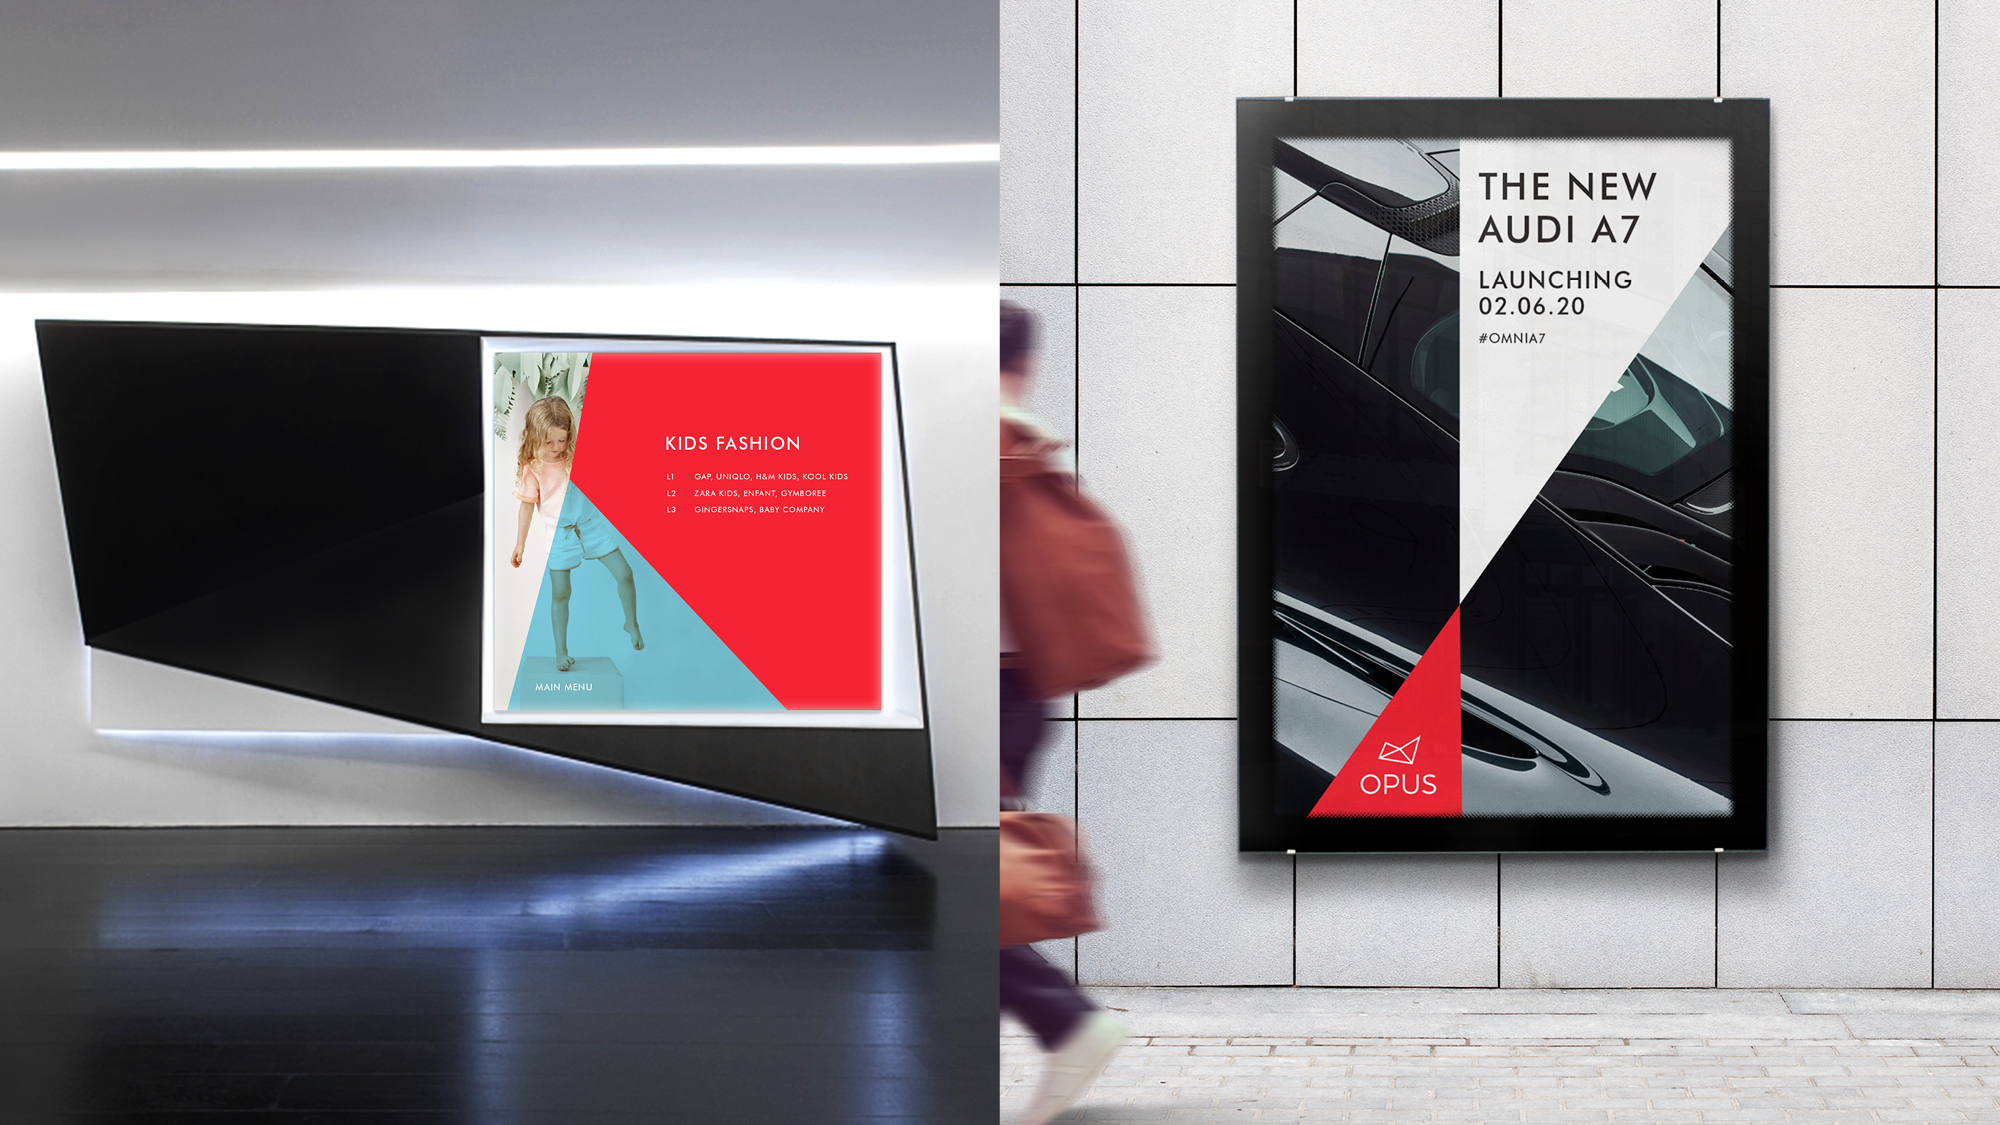 Entity-3-Three-Brand-Design-Agency-Sydney-Property-and-Placemaking-25-experience-environments-signage-campaign-ooh-ad